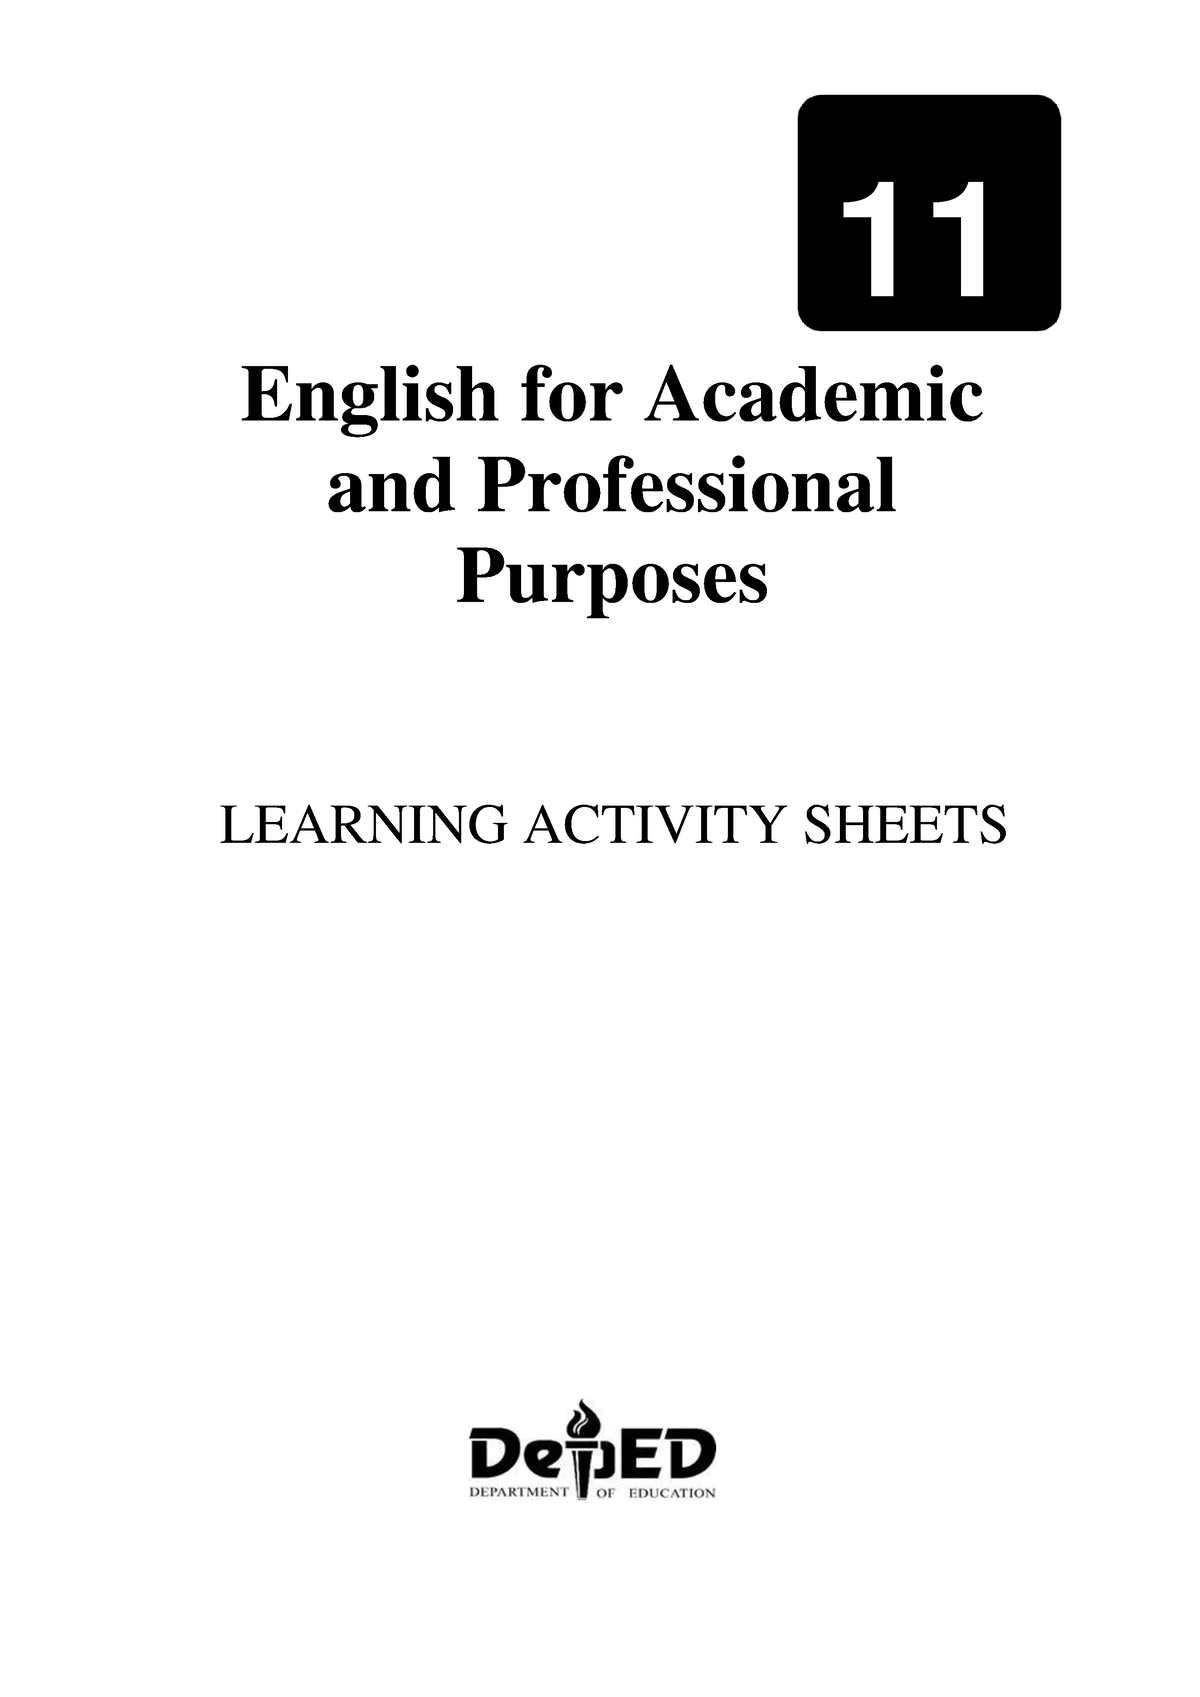 Eapp Q2 Las Eapp Q2 Las 11 English For Academic And Professional Purposes Learning Activity 5407